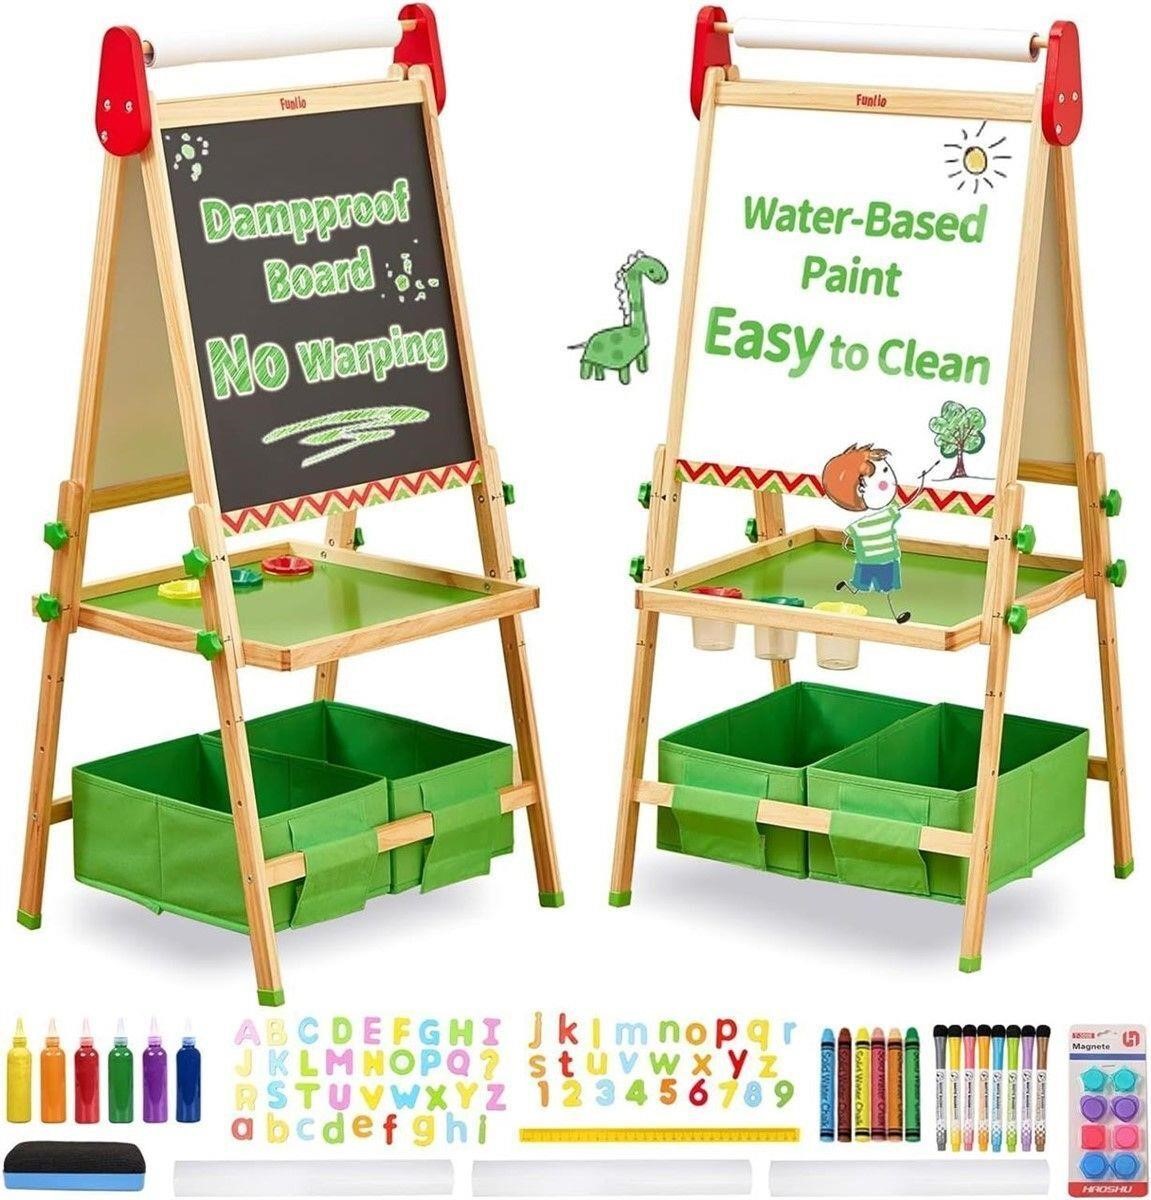 USED $130 All-in-One Kids Art Easel (Green)